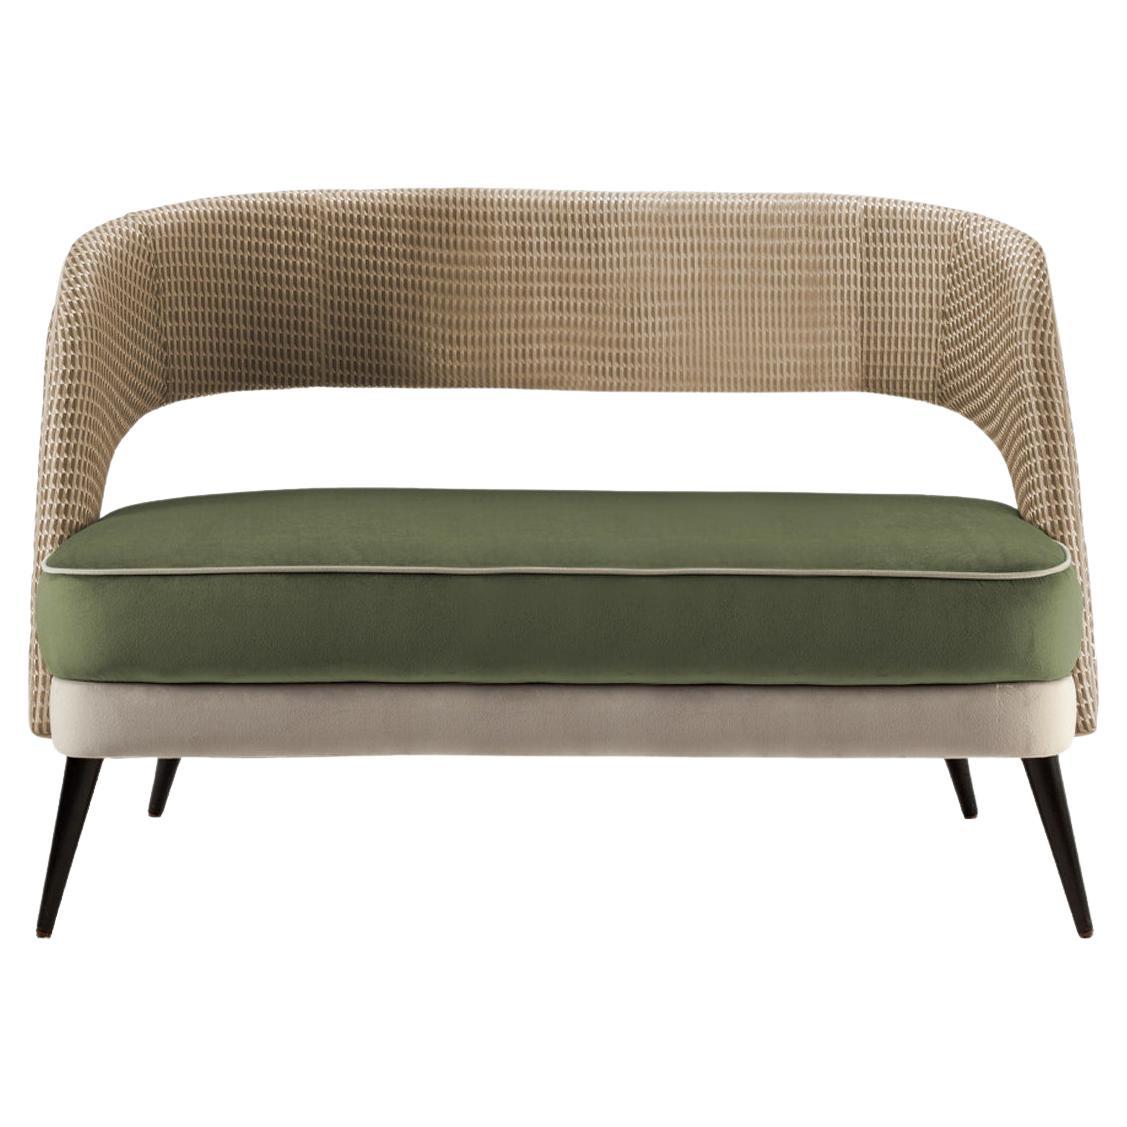 Comfortable and elegant, Ava settee is a versatile piece where creativity meets no boundaries: fabrics, solid woods, lacquers and brass fittings are chosen and combined in many ways to produce the perfect combination to each space and concept. Made